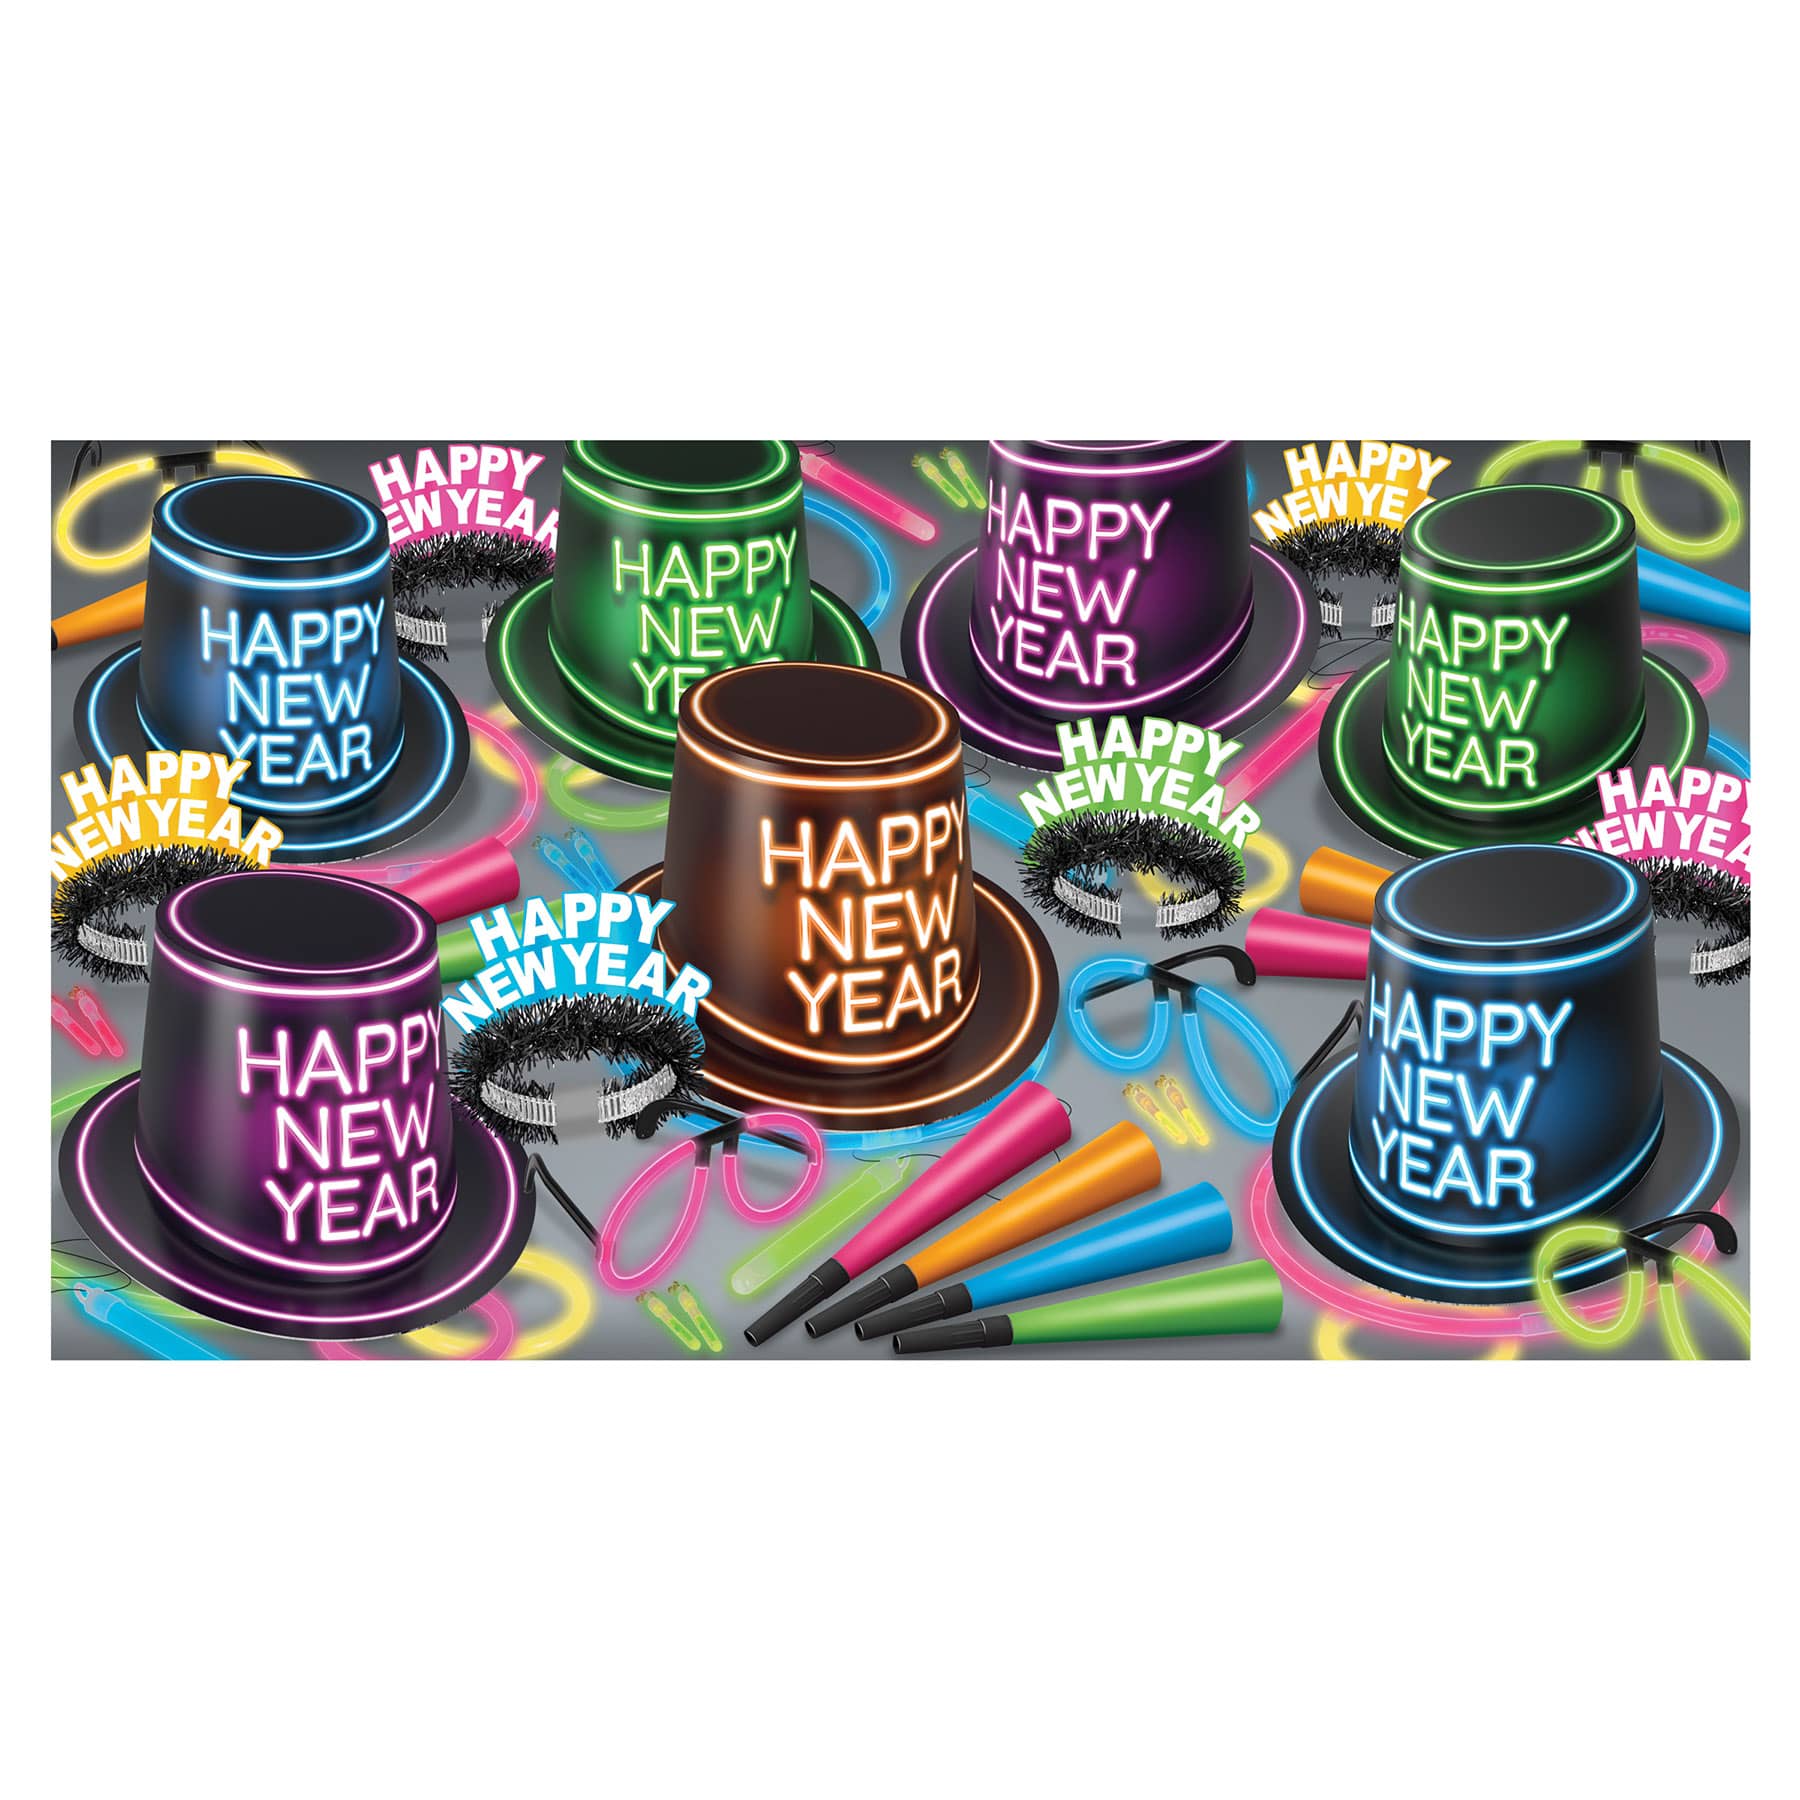 Glowing New Year Assortment for 50 - Glow Party NYE